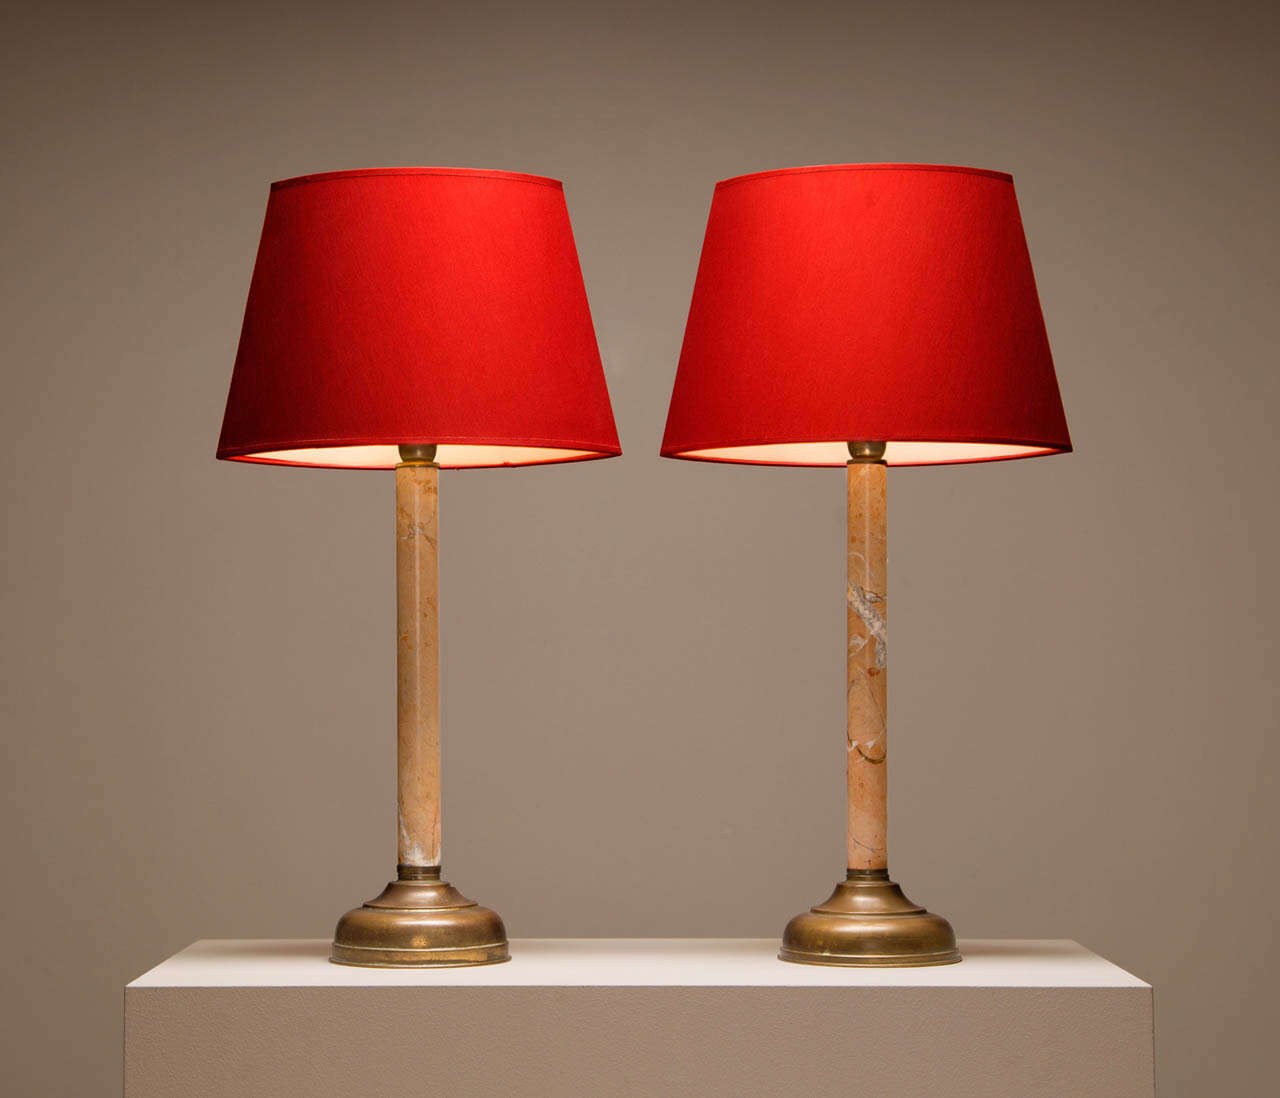 Tommaso Barbi, pair of table lamp, marble, red canvas, brass, Italy.

Unique pair of Italian table lamps with nice marble stem and brass foot with nice patina to the surface. The combination of the colors and materials in this lamp is well